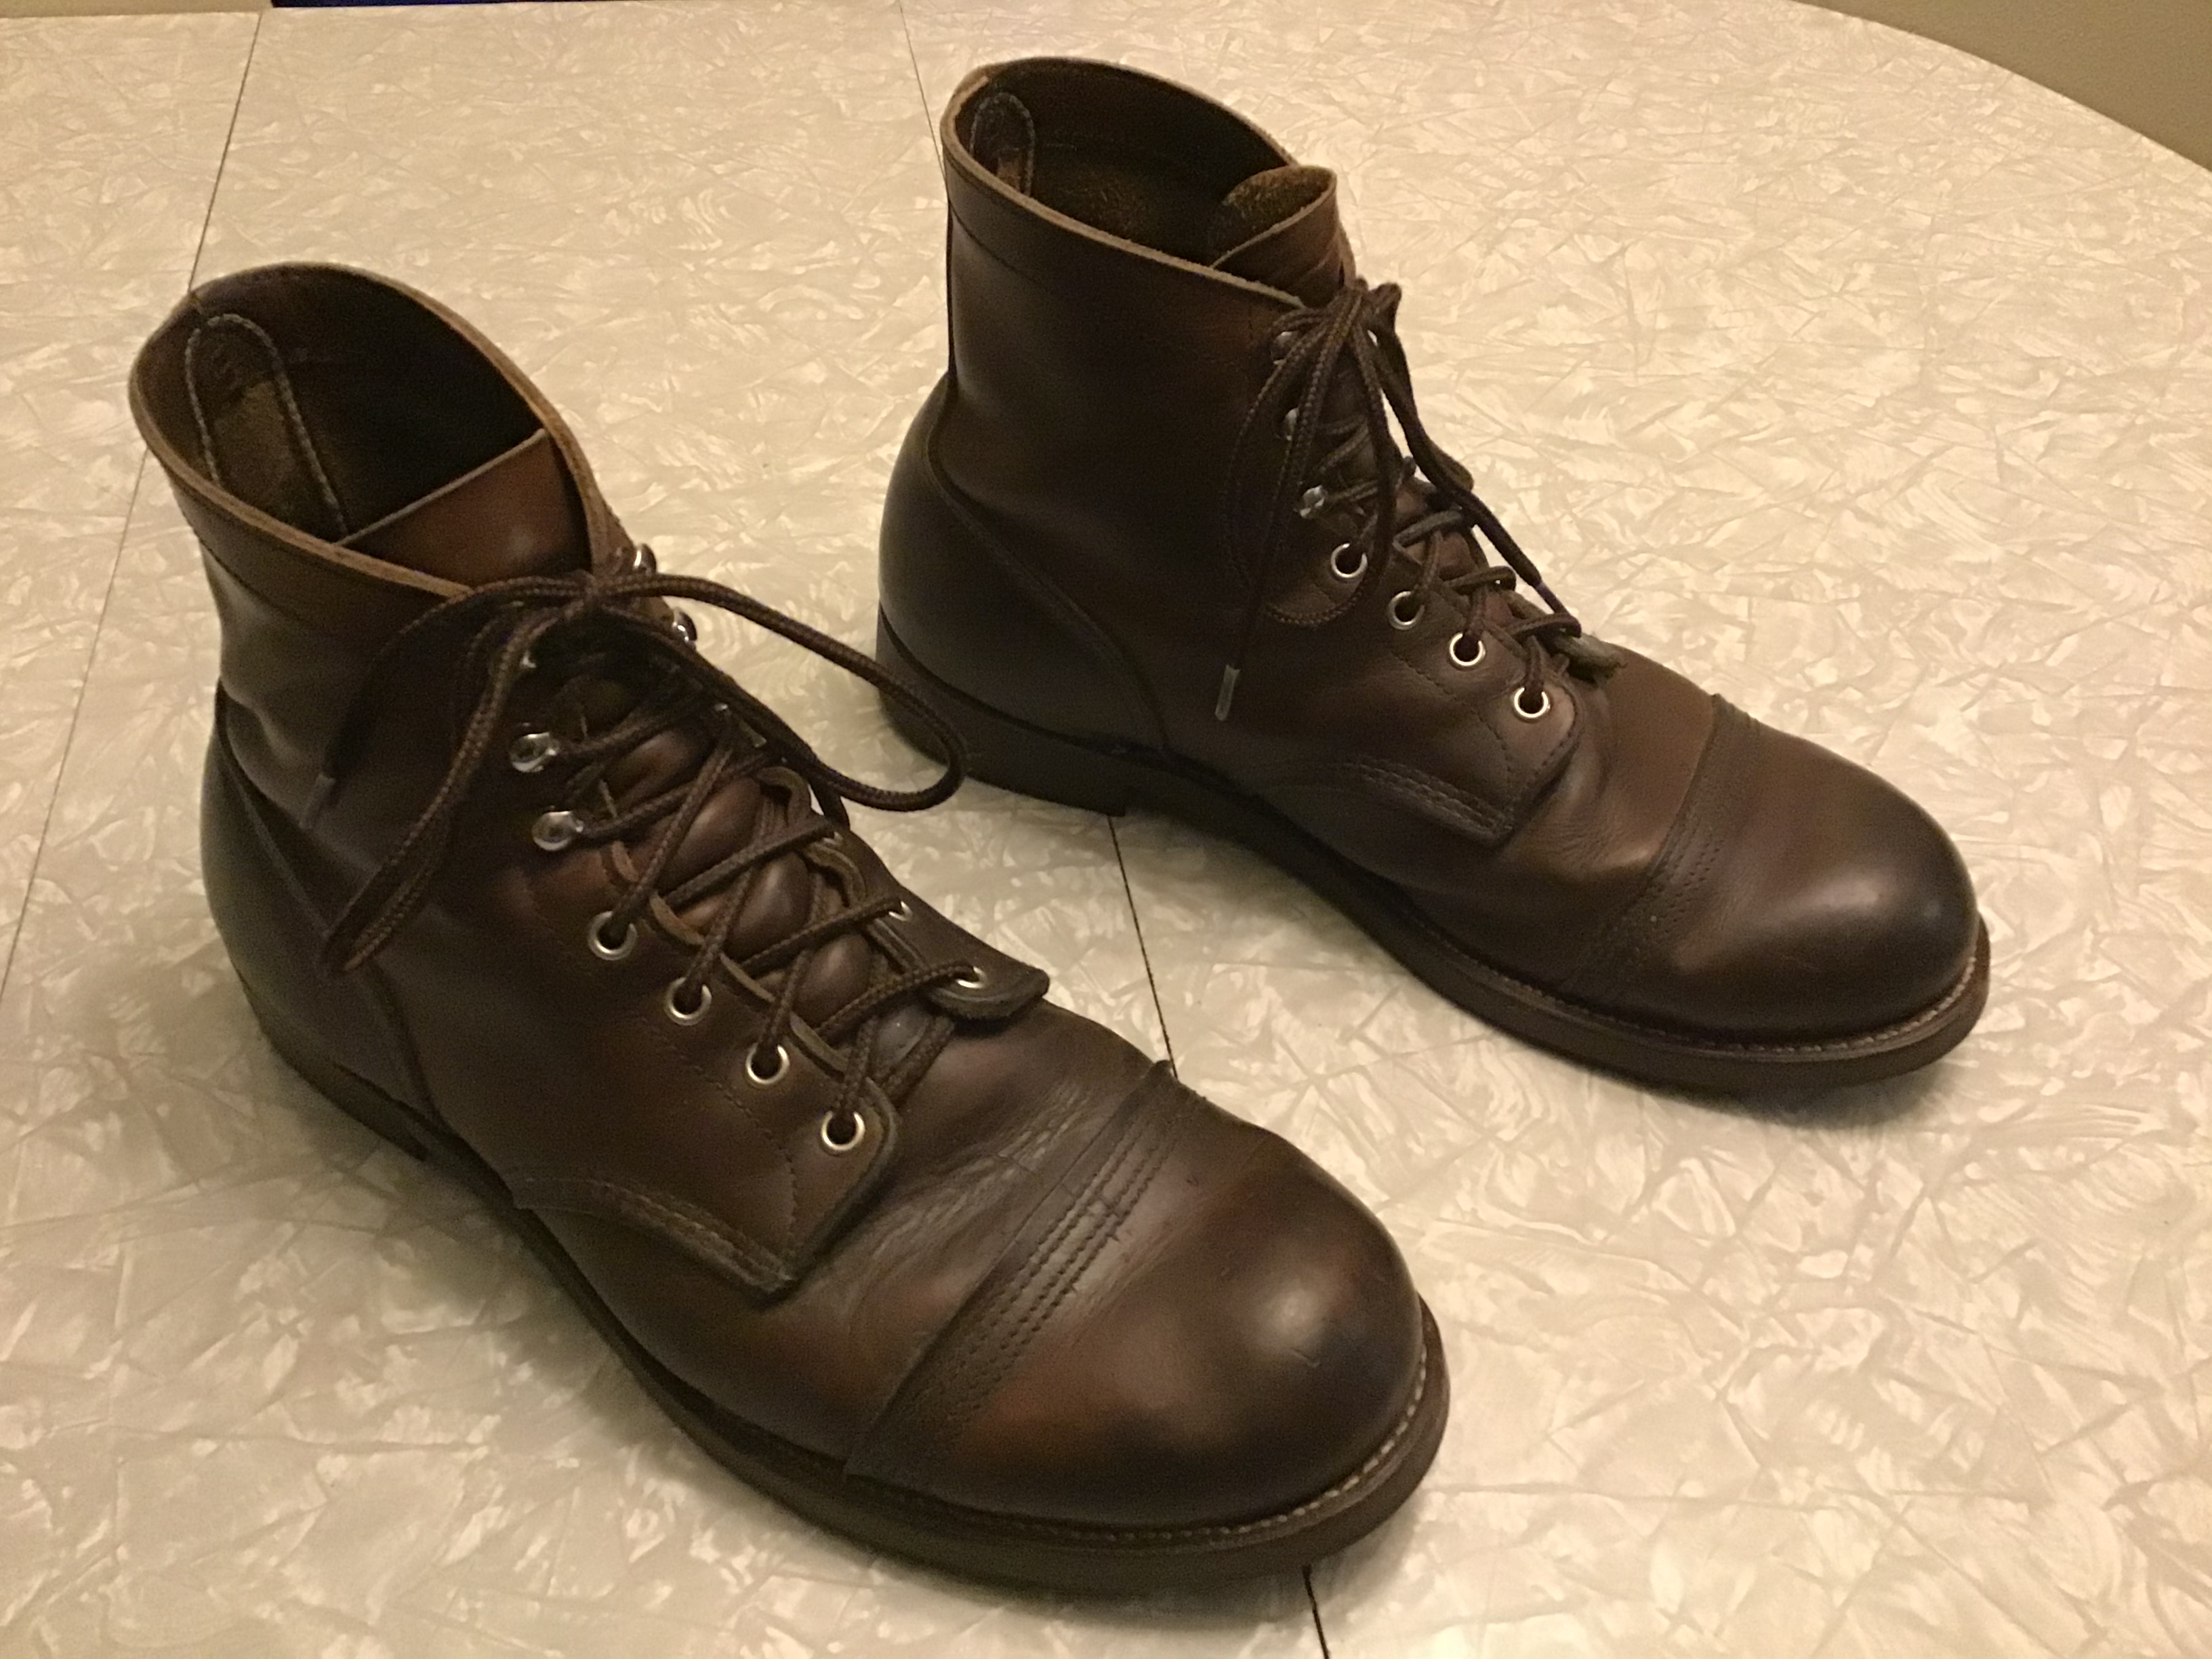 Red Wing Rangers size 12 EE Amber | The Fedora Lounge